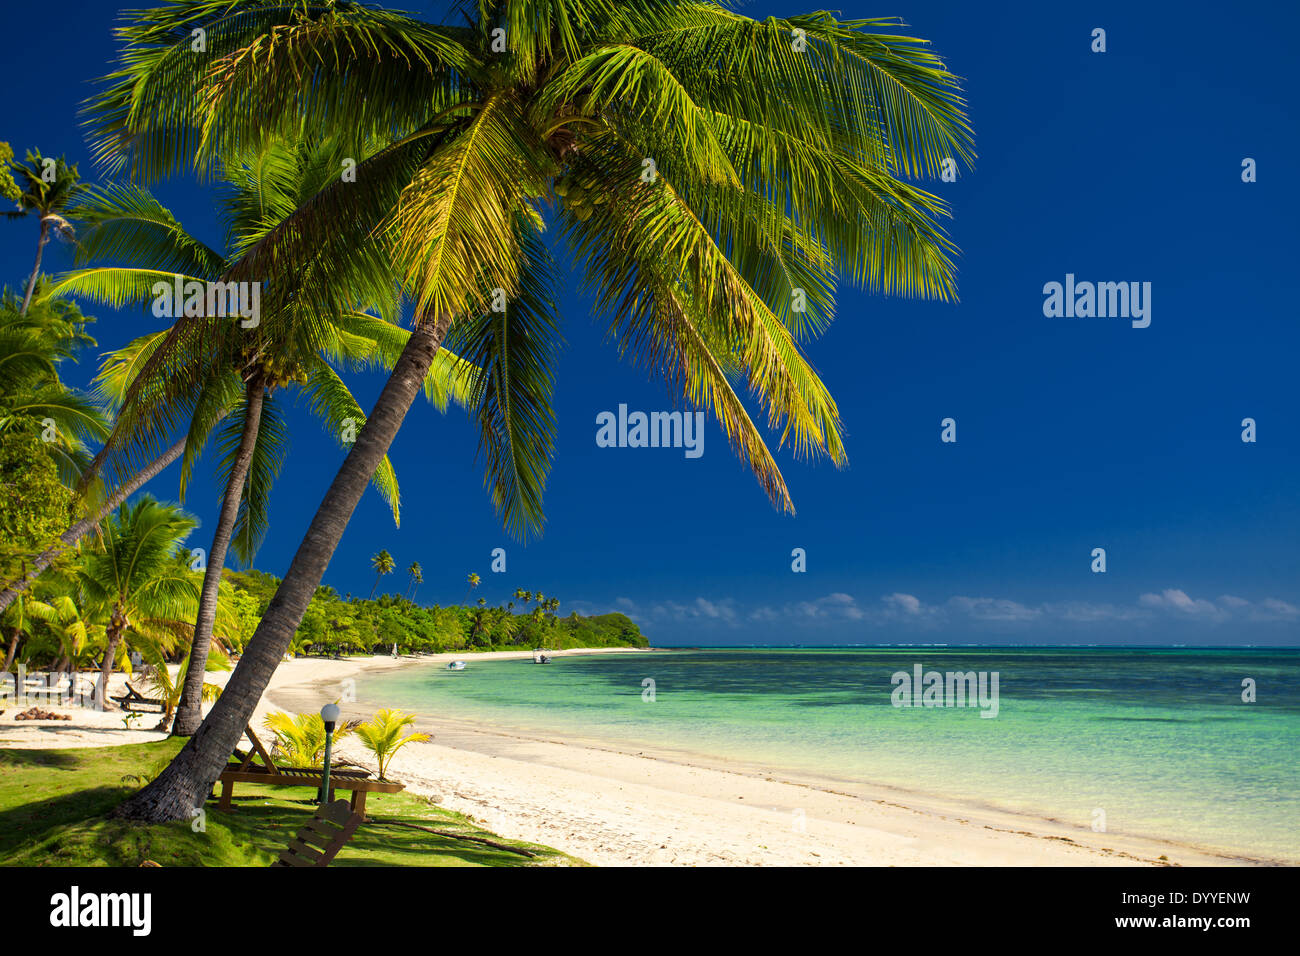 Palm trees and a white sandy beach at Fiji Islands Stock Photo